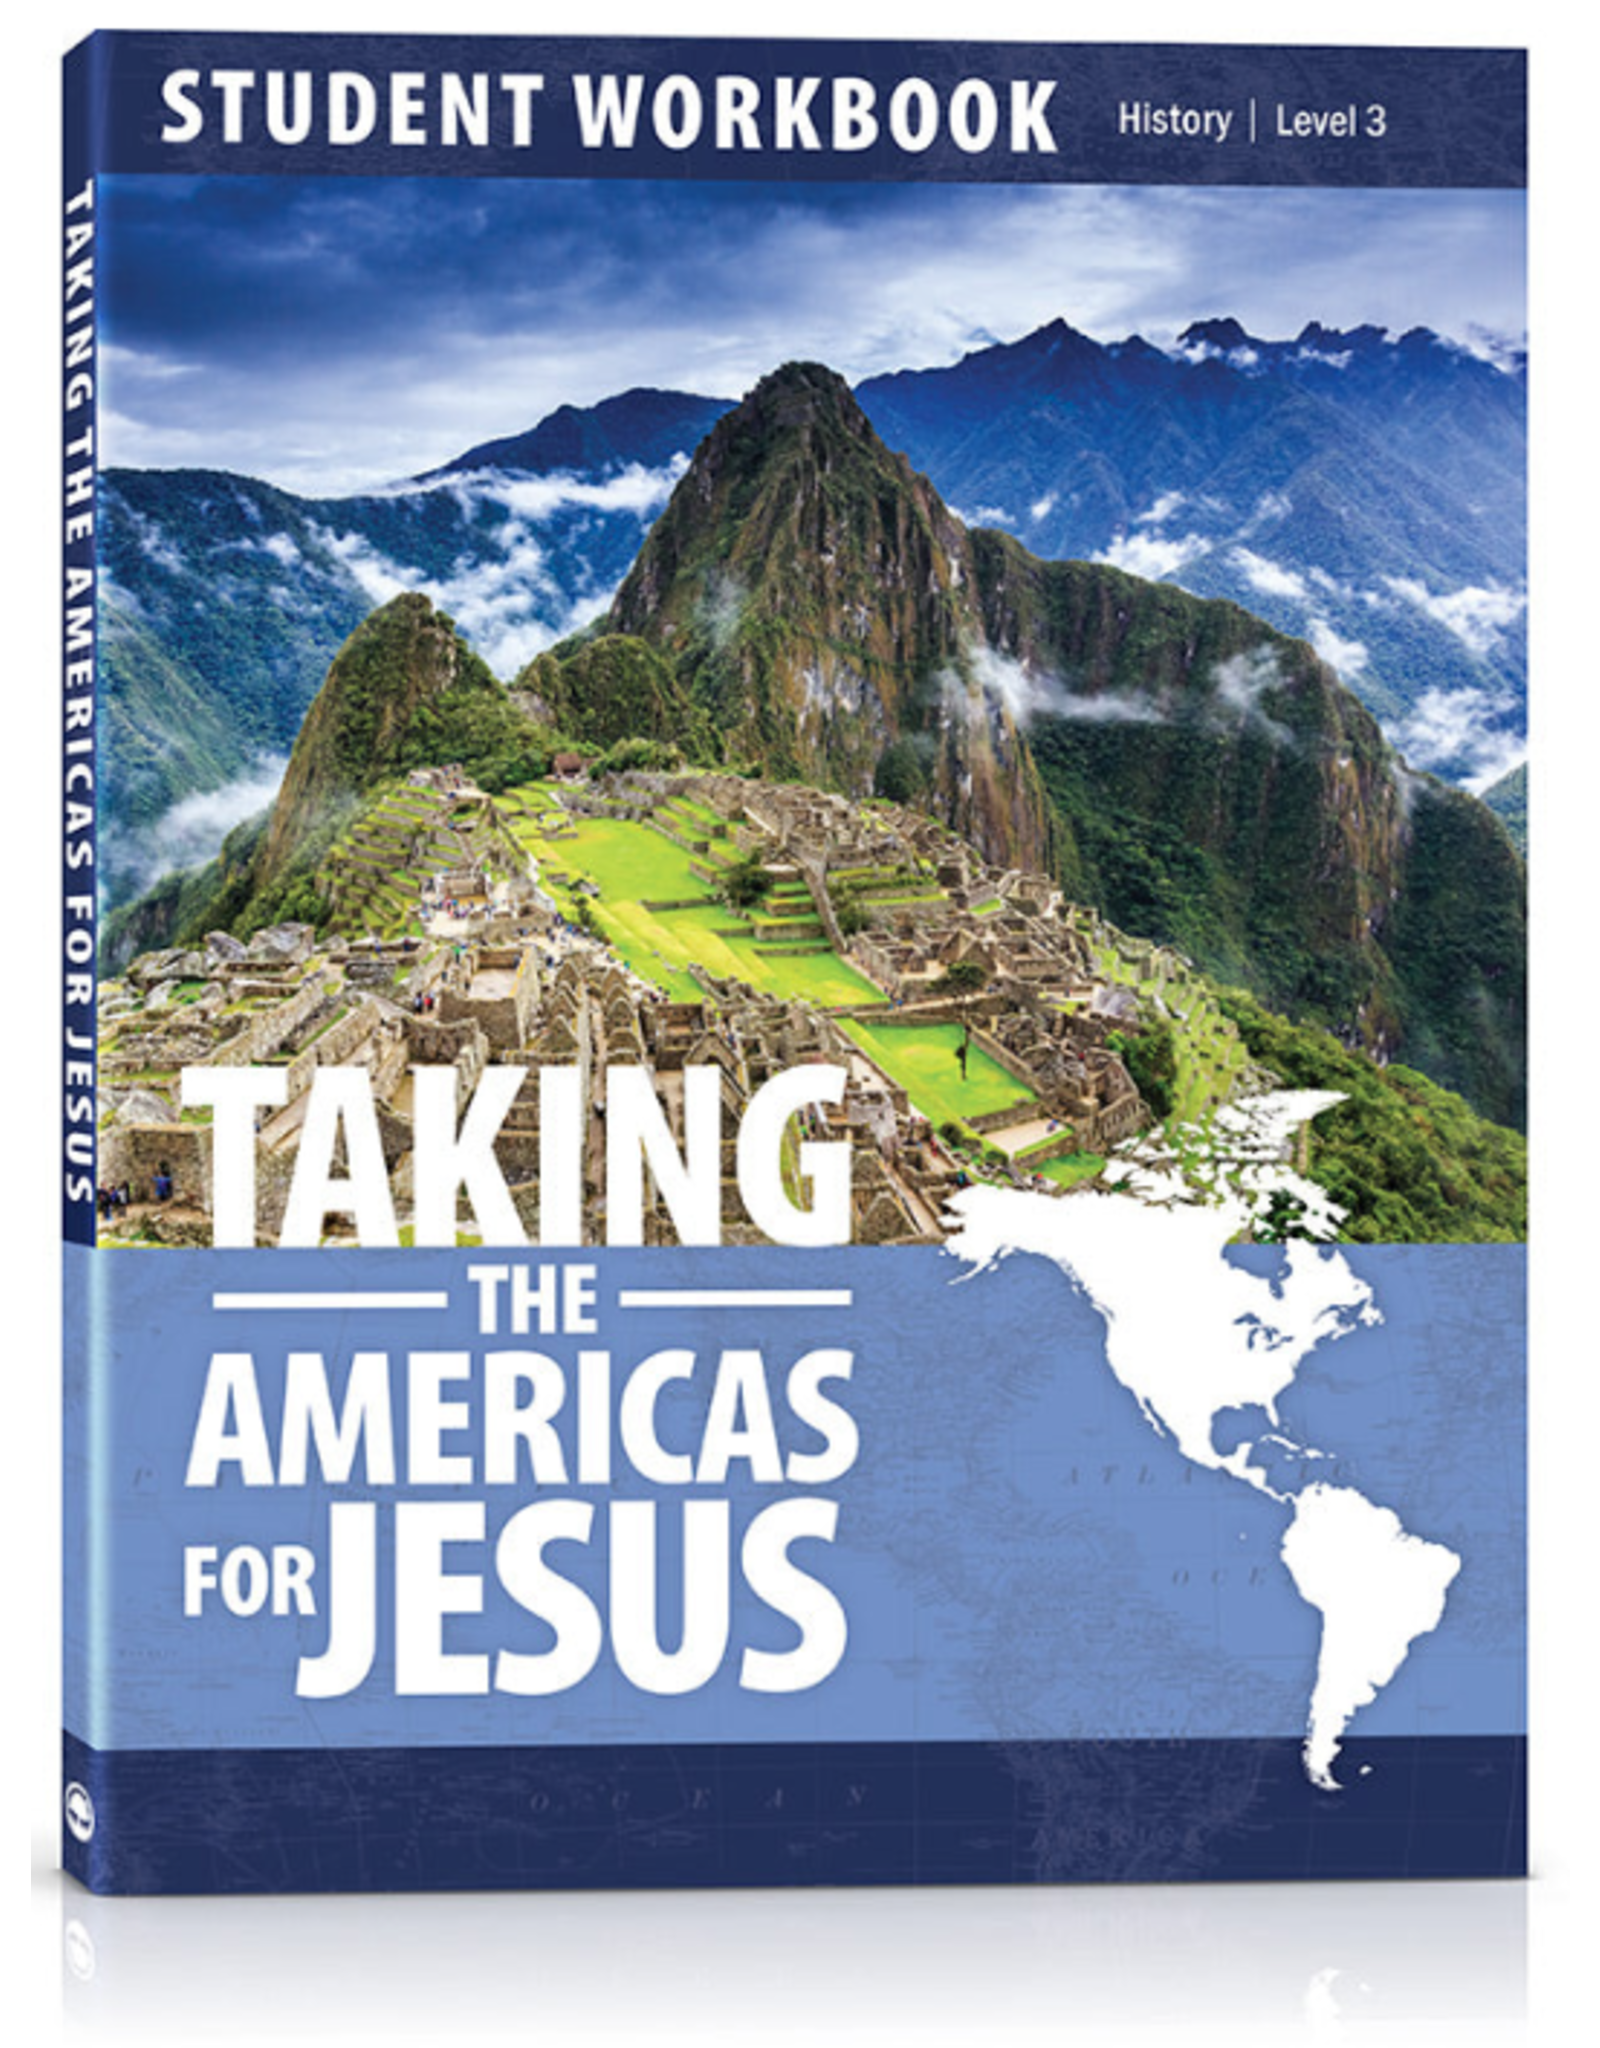 Taking the Americas for Jesus - Student Workbook Level 3